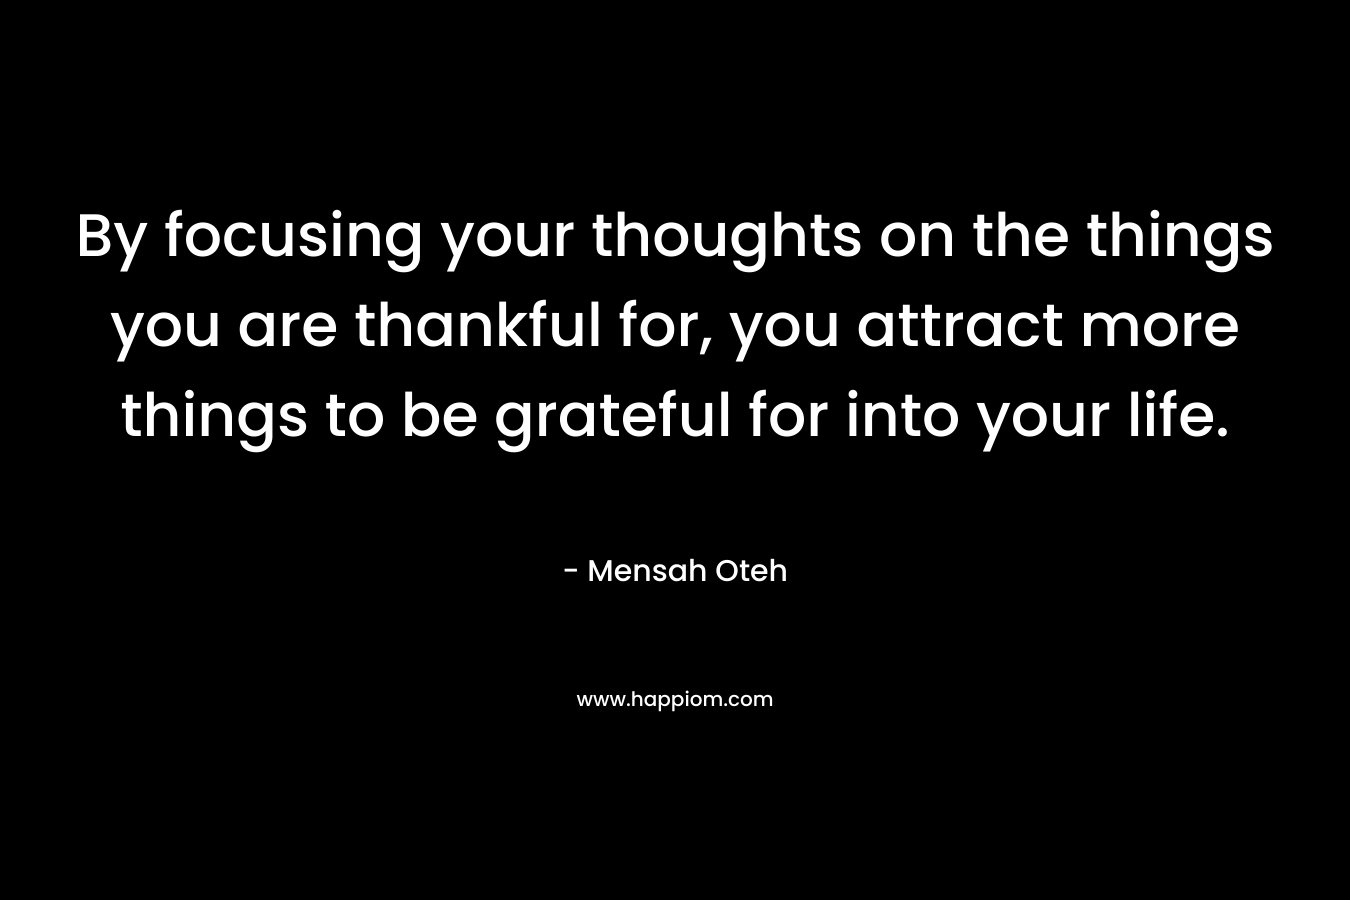 By focusing your thoughts on the things you are thankful for, you attract more things to be grateful for into your life.